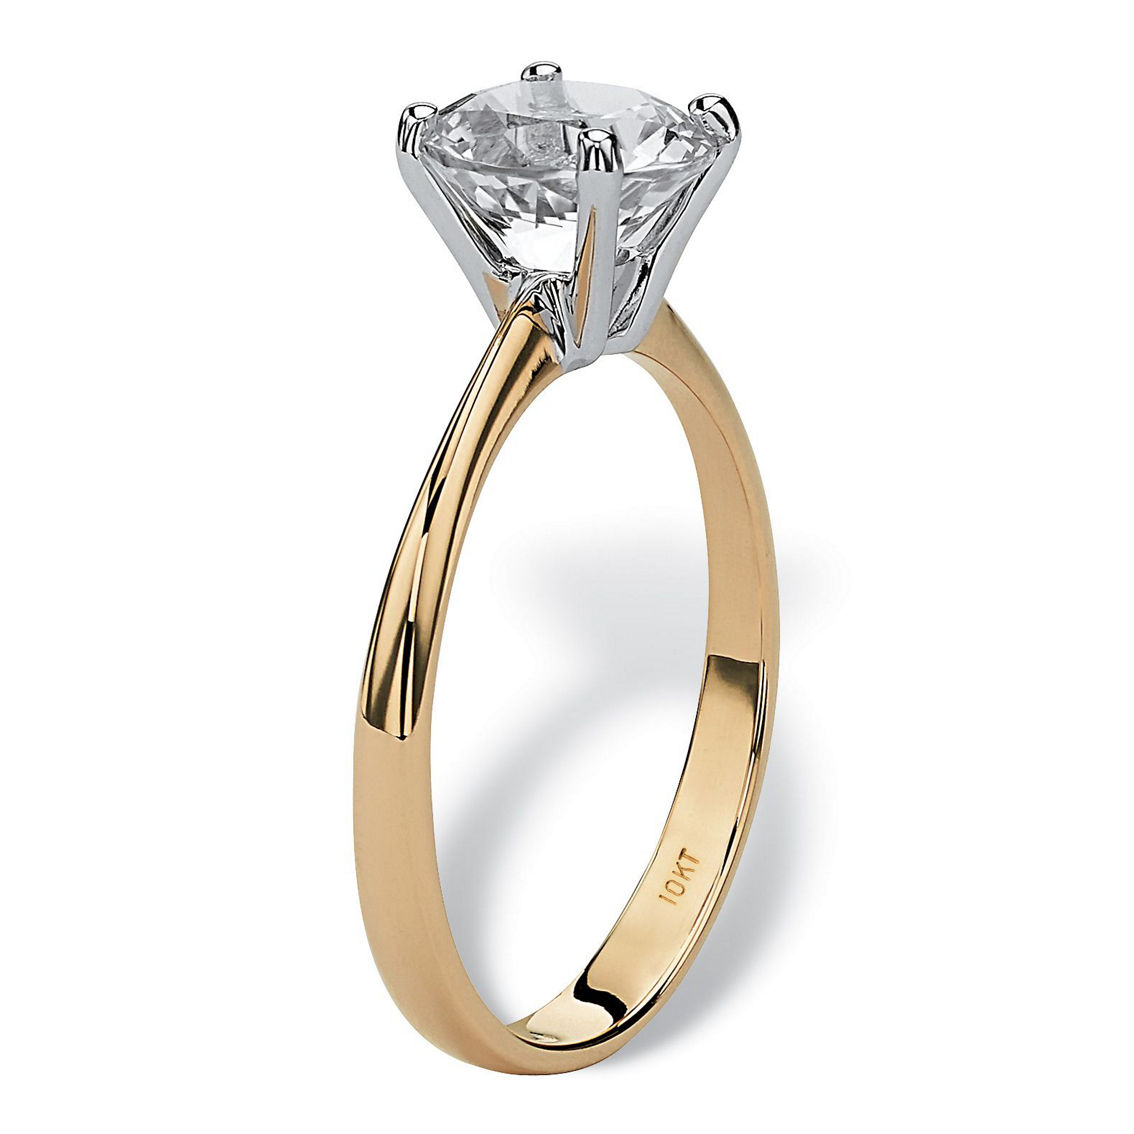 2.50-Carat Round Genuine Topaz 10k Yellow Gold Solitaire Bridal Engagement Ring - Image 2 of 5